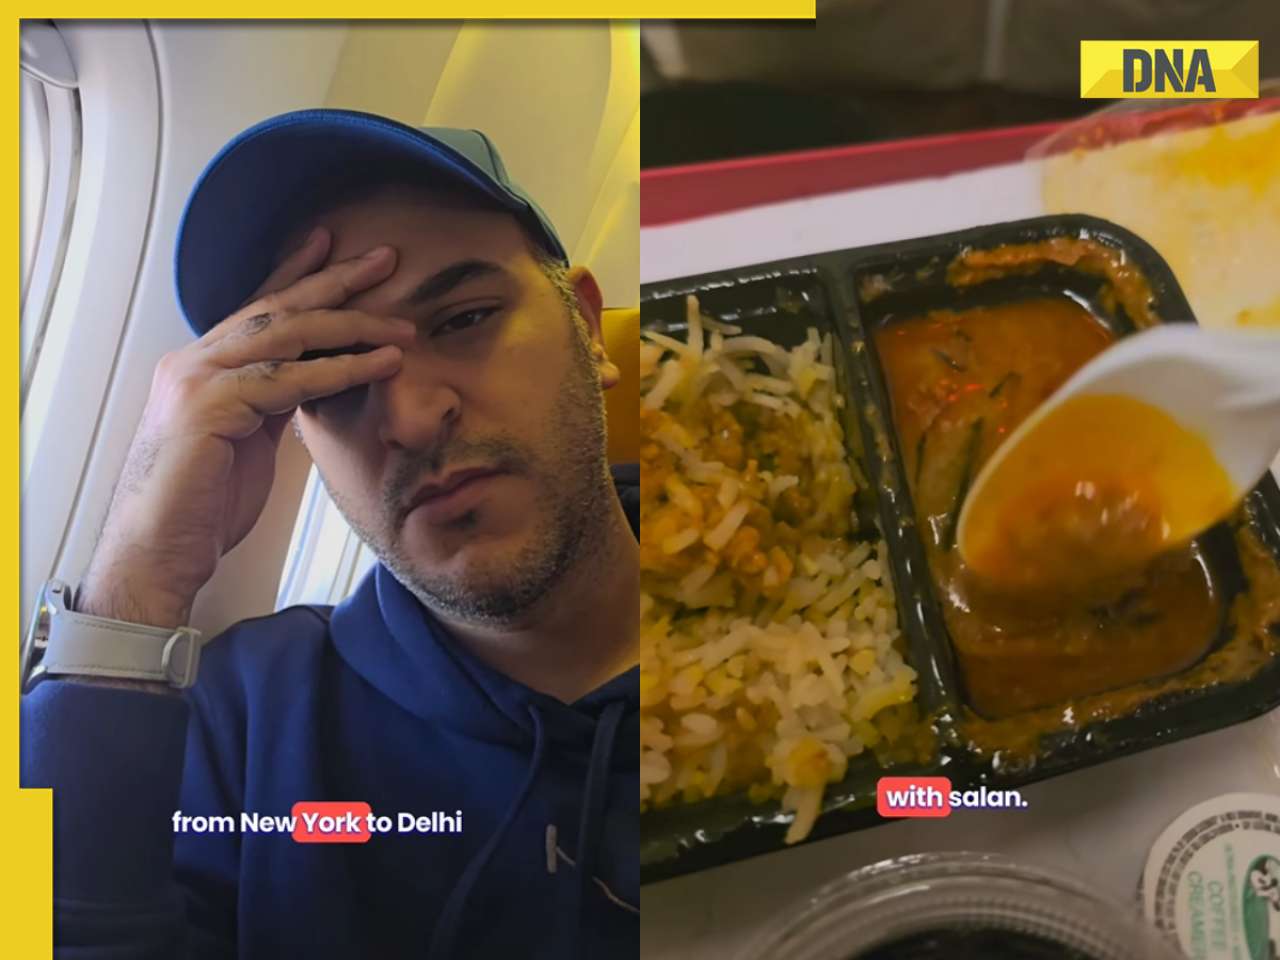 Passenger labels Air India flight from New York a 'disaster' over poor food and service, video is viral